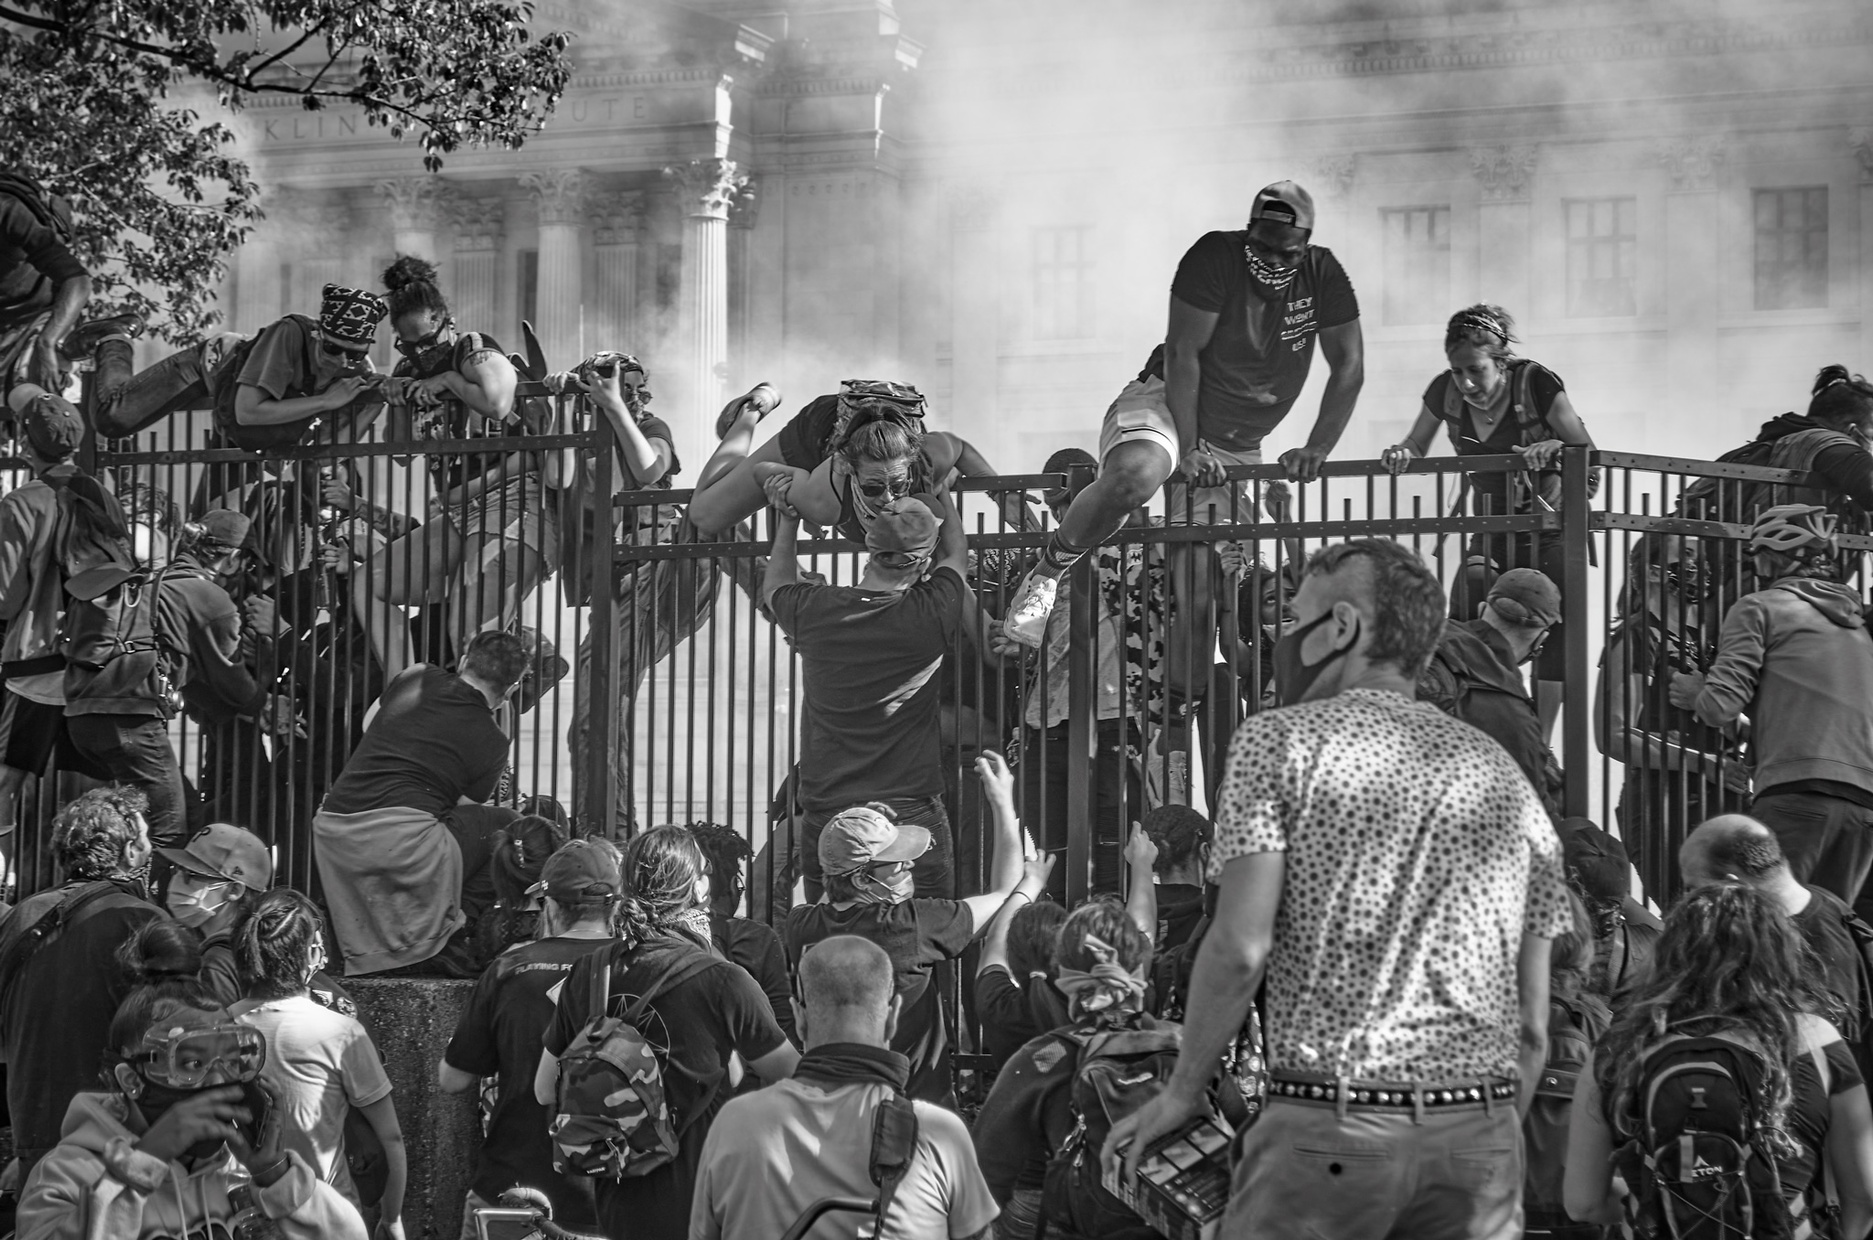 A black and white photograph of protestors climbing over an iron fence in front of a colonial-stye building towards a group of protestors on the other side. A white fog curls up behind the protestors climbing the fence.